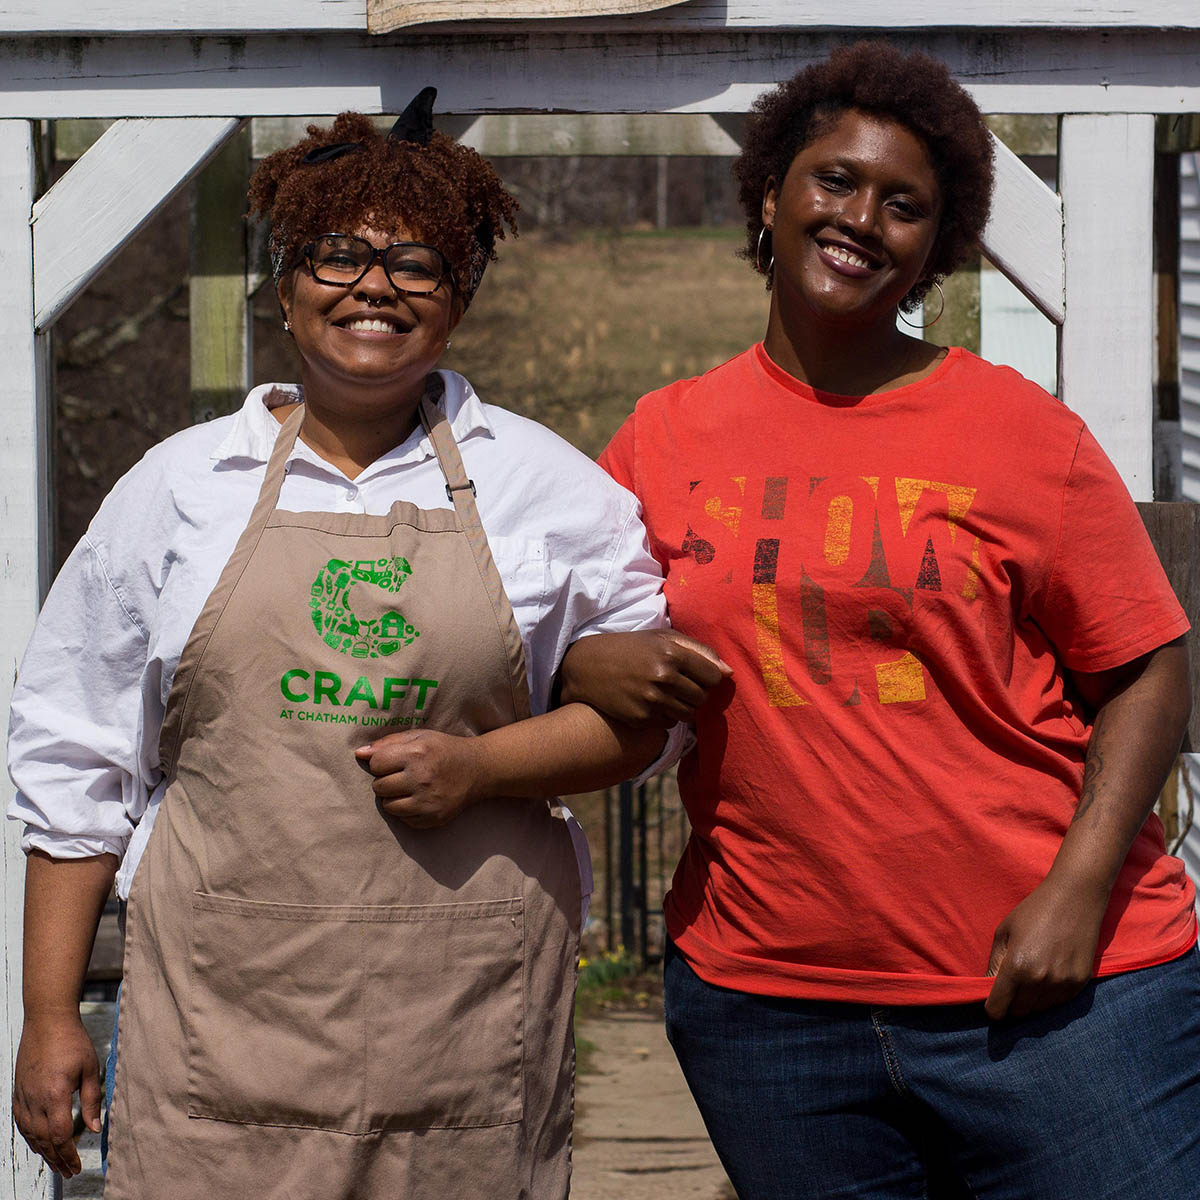 Photo of two smiling Black women linking arms. One is wearing a CRAFT apron.